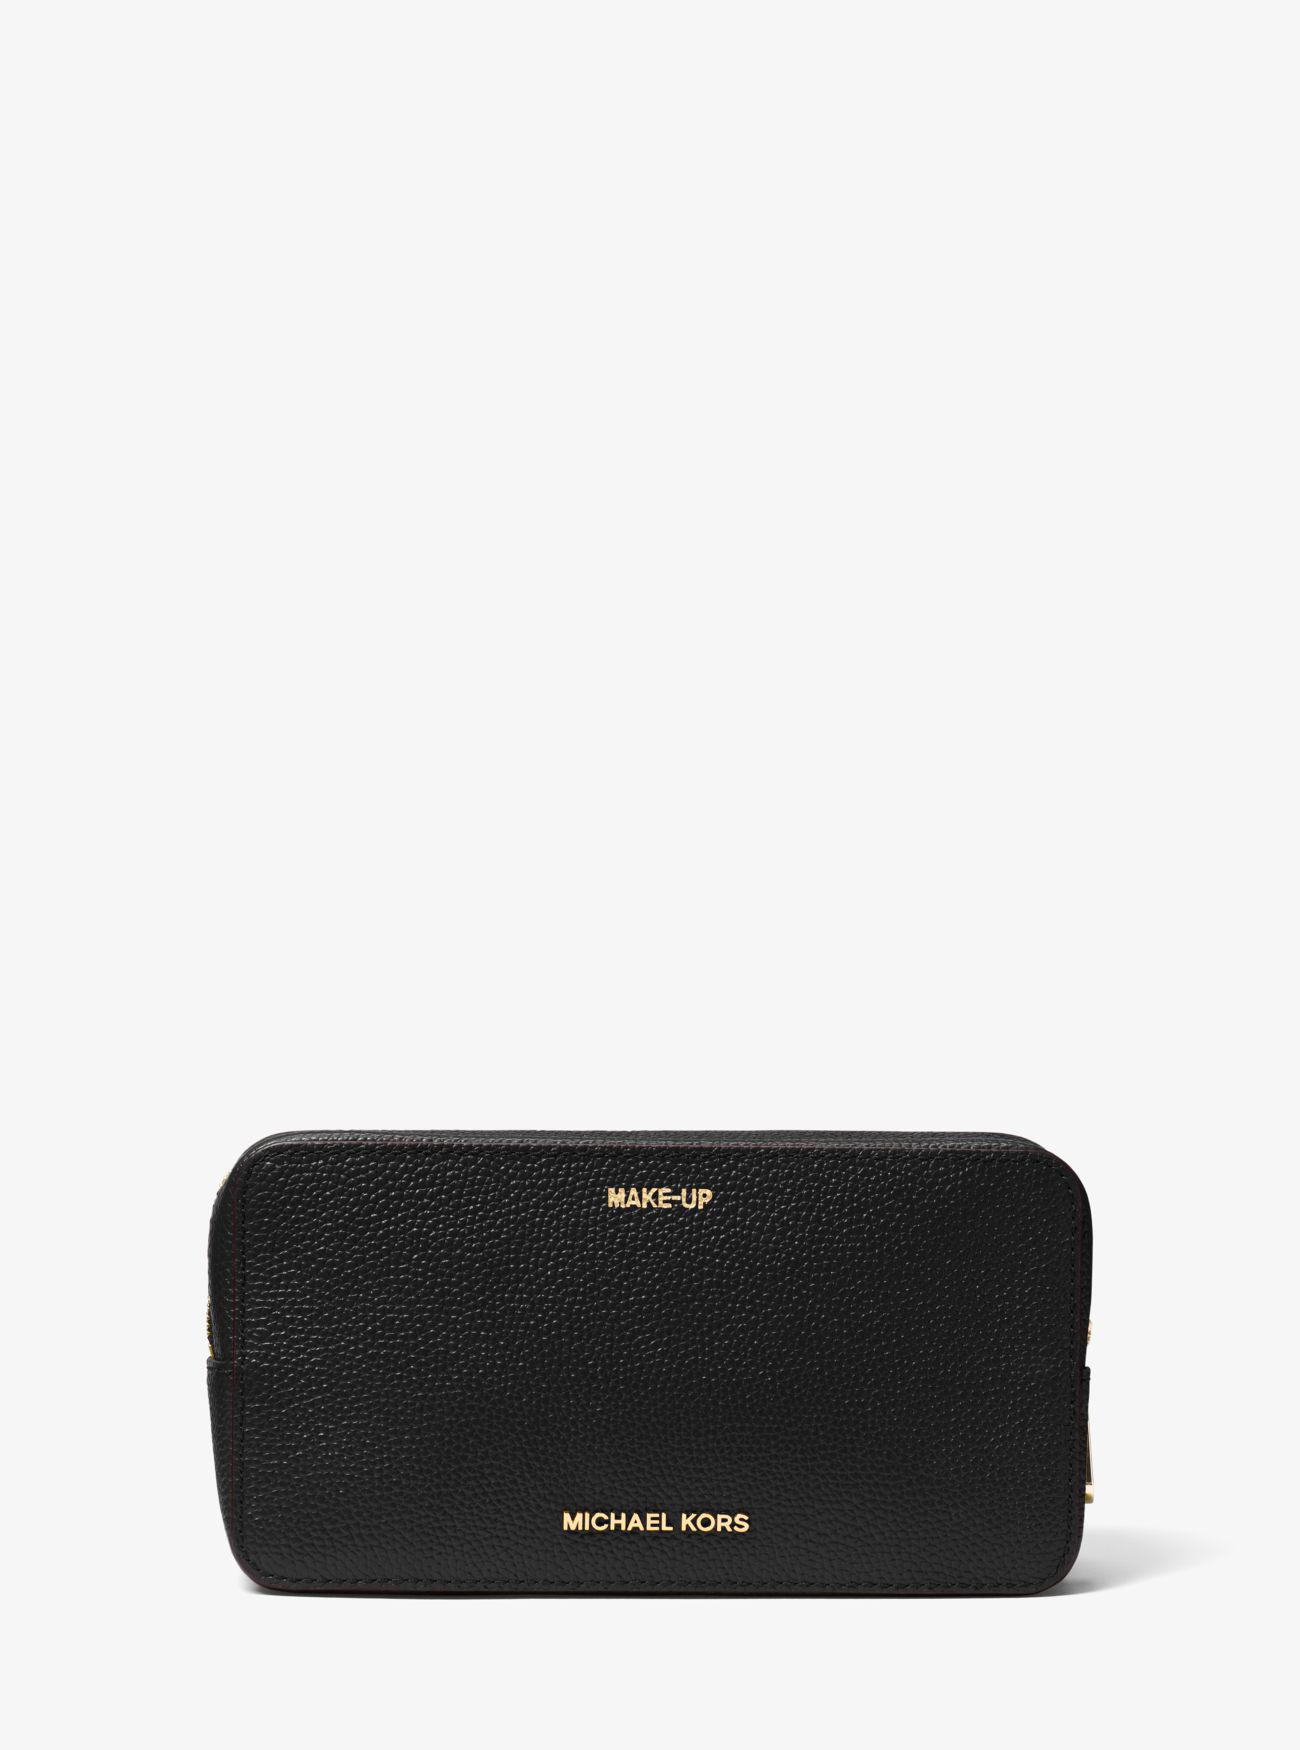 Michael Kors Jet Set Travel Leather Cosmetic Pouch in Black - Lyst